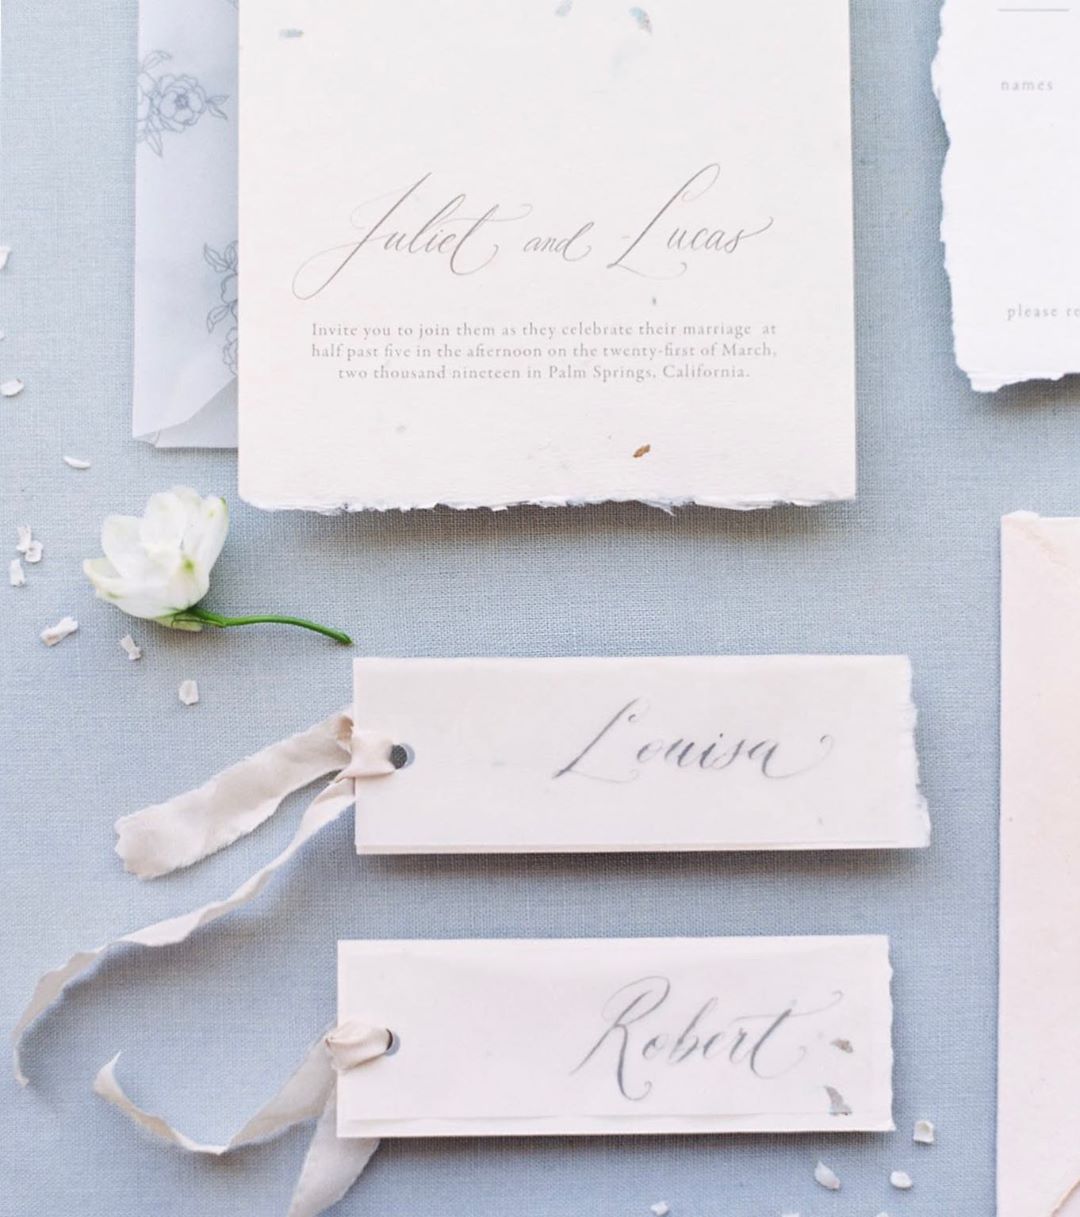 Rectangular place cards with calligraphy, silk ribbon and vellum overlay by Dominique Alba, with photography by Melanie Osorio and planning by Providence & Planning